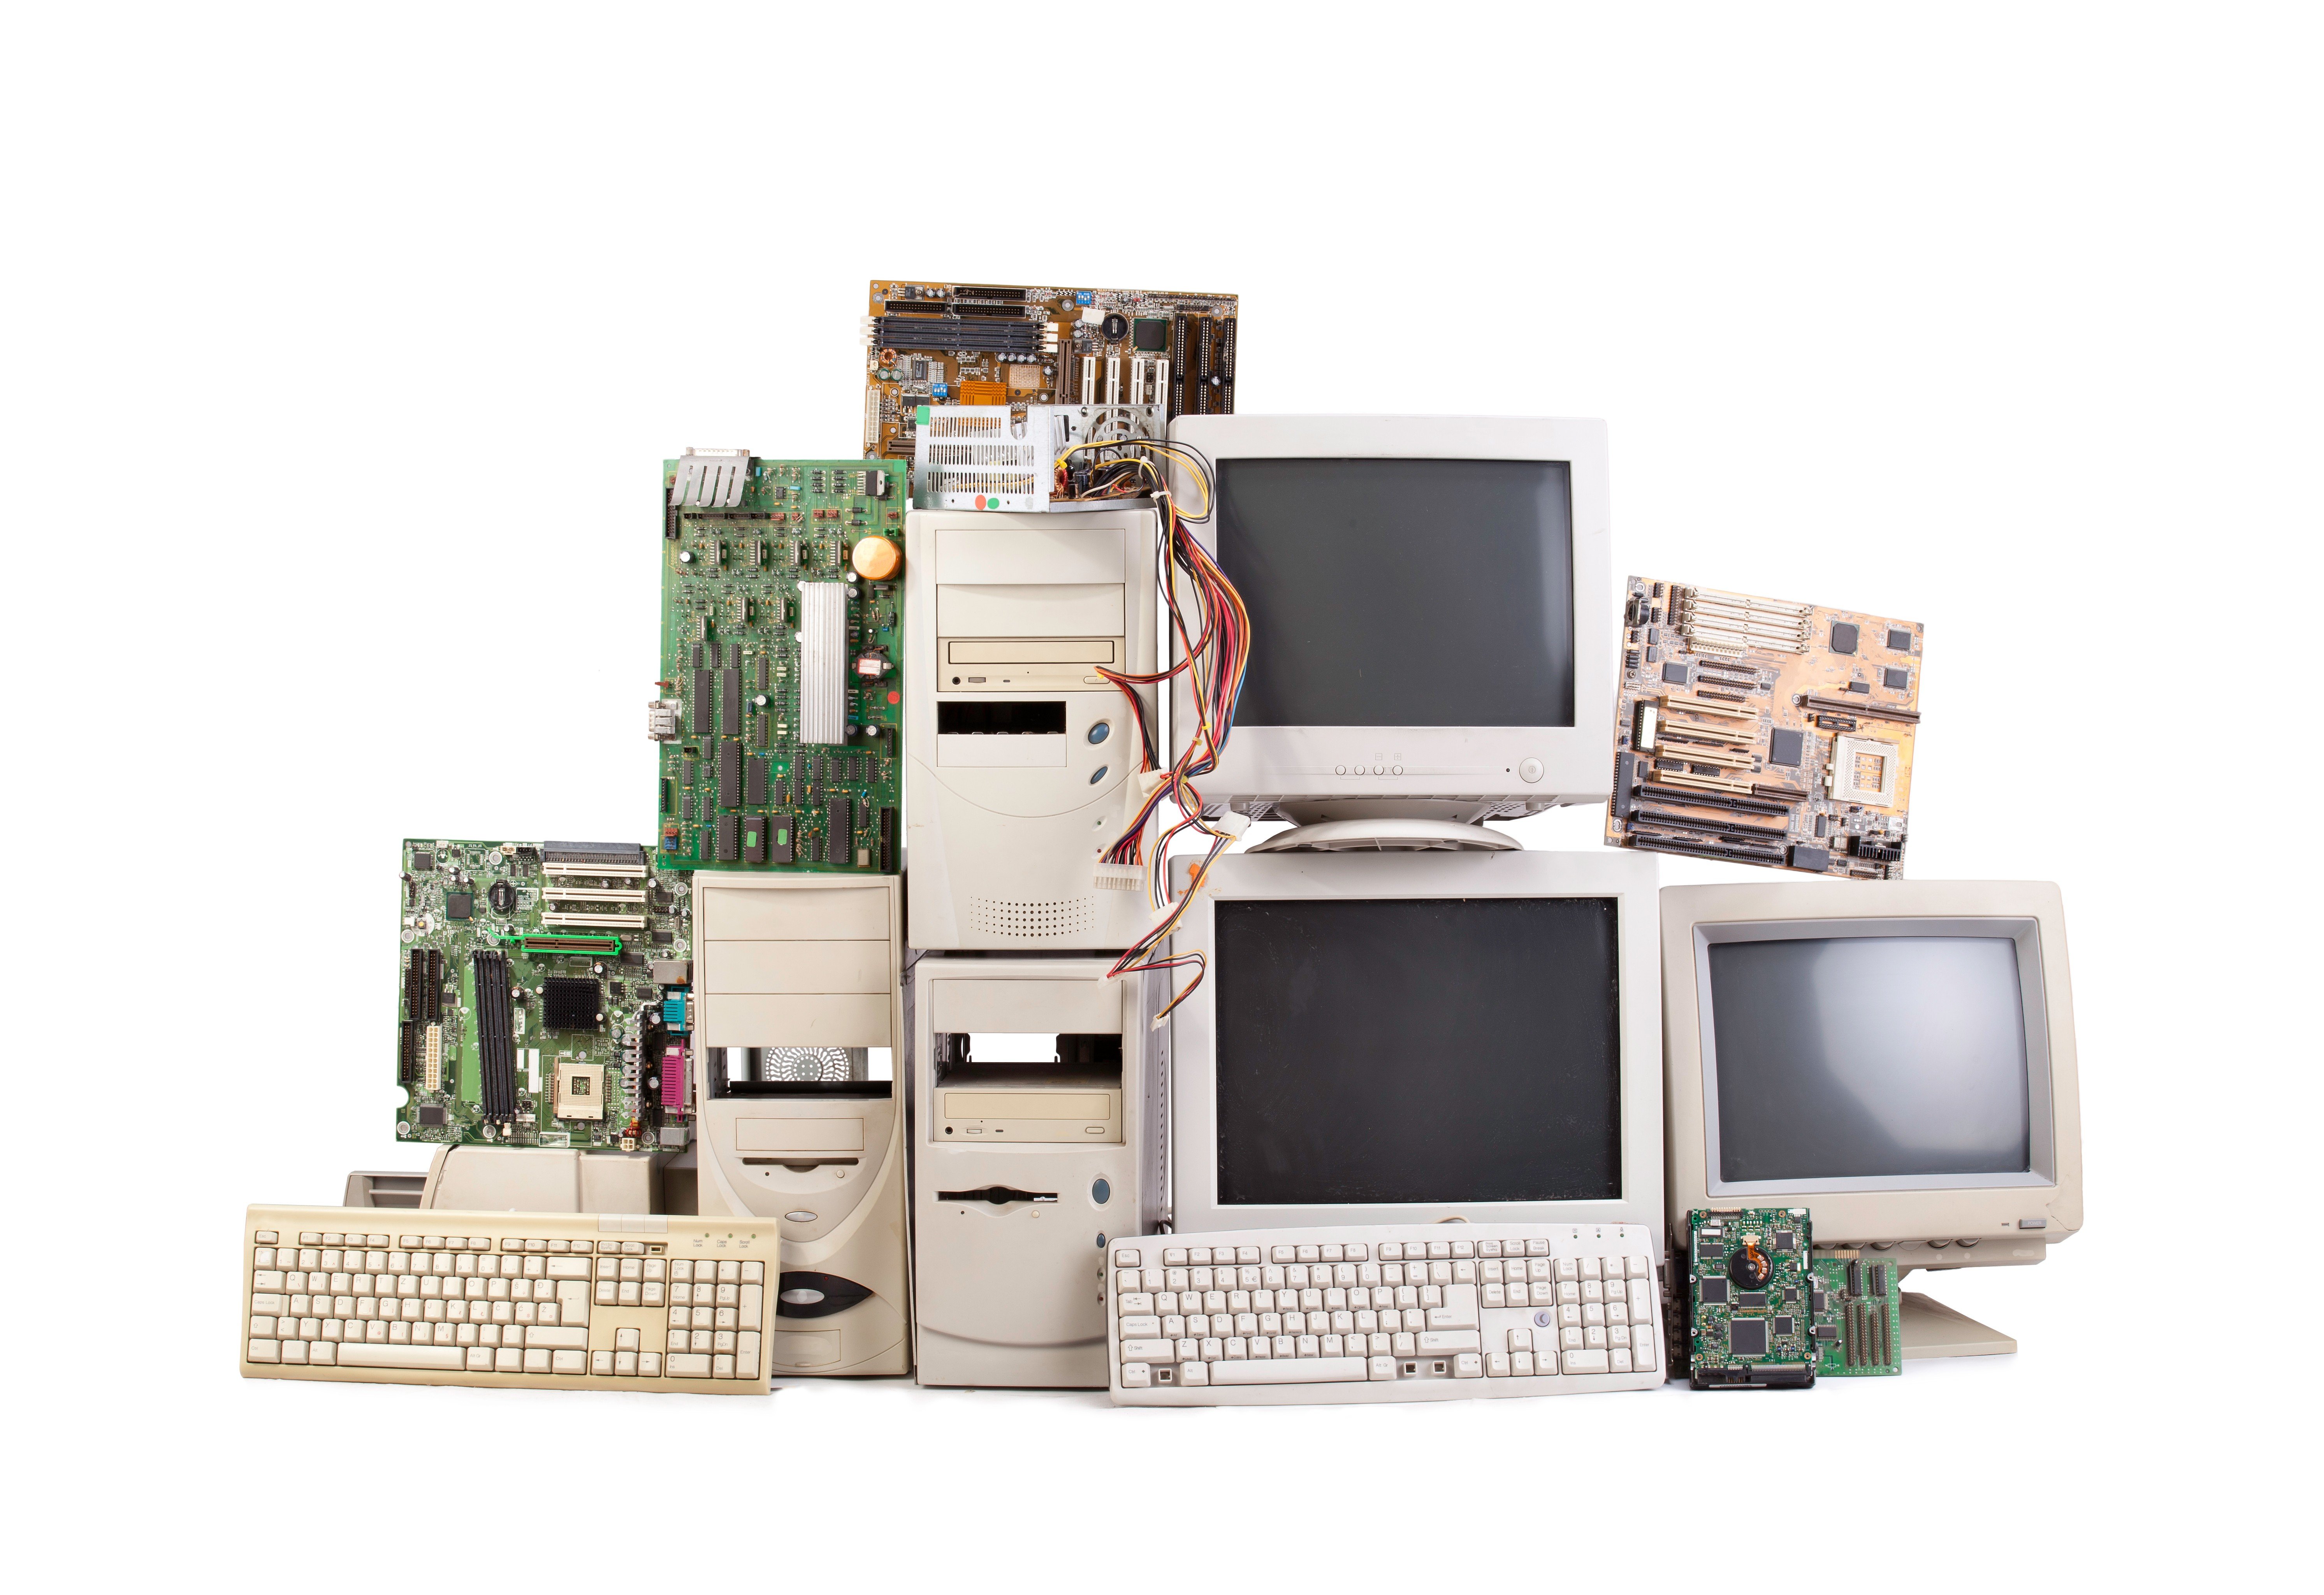 Countries in Africa have laws protecting them from hazardous waste from the developed world. However, this makes it difficult for them to acquire second-hand computers. Photo: Shutterstock